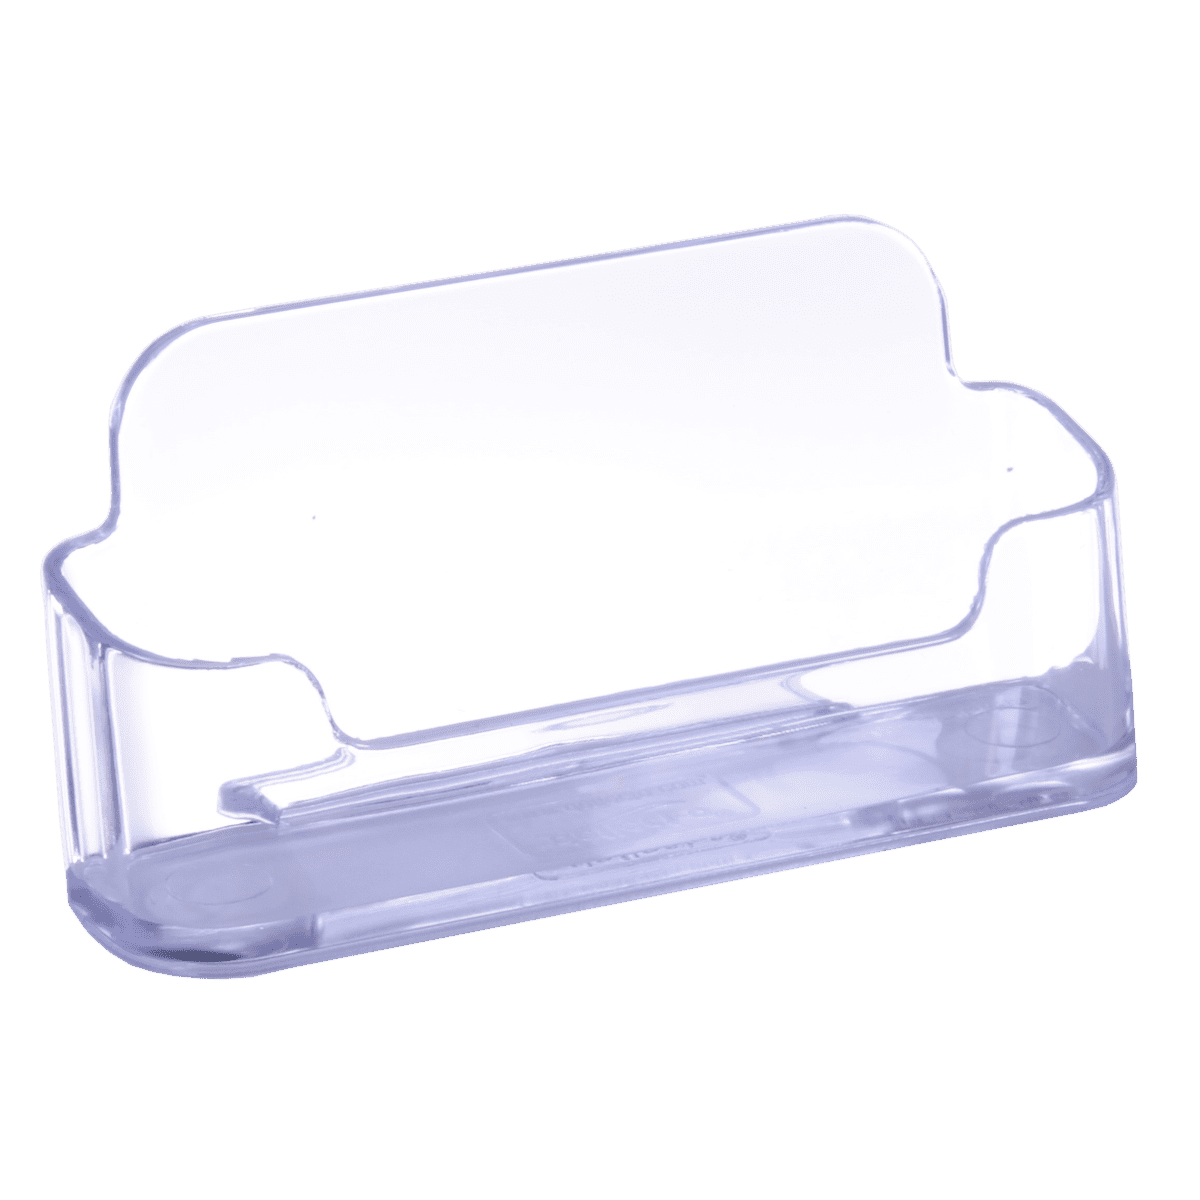 General Acrylic Card Holders